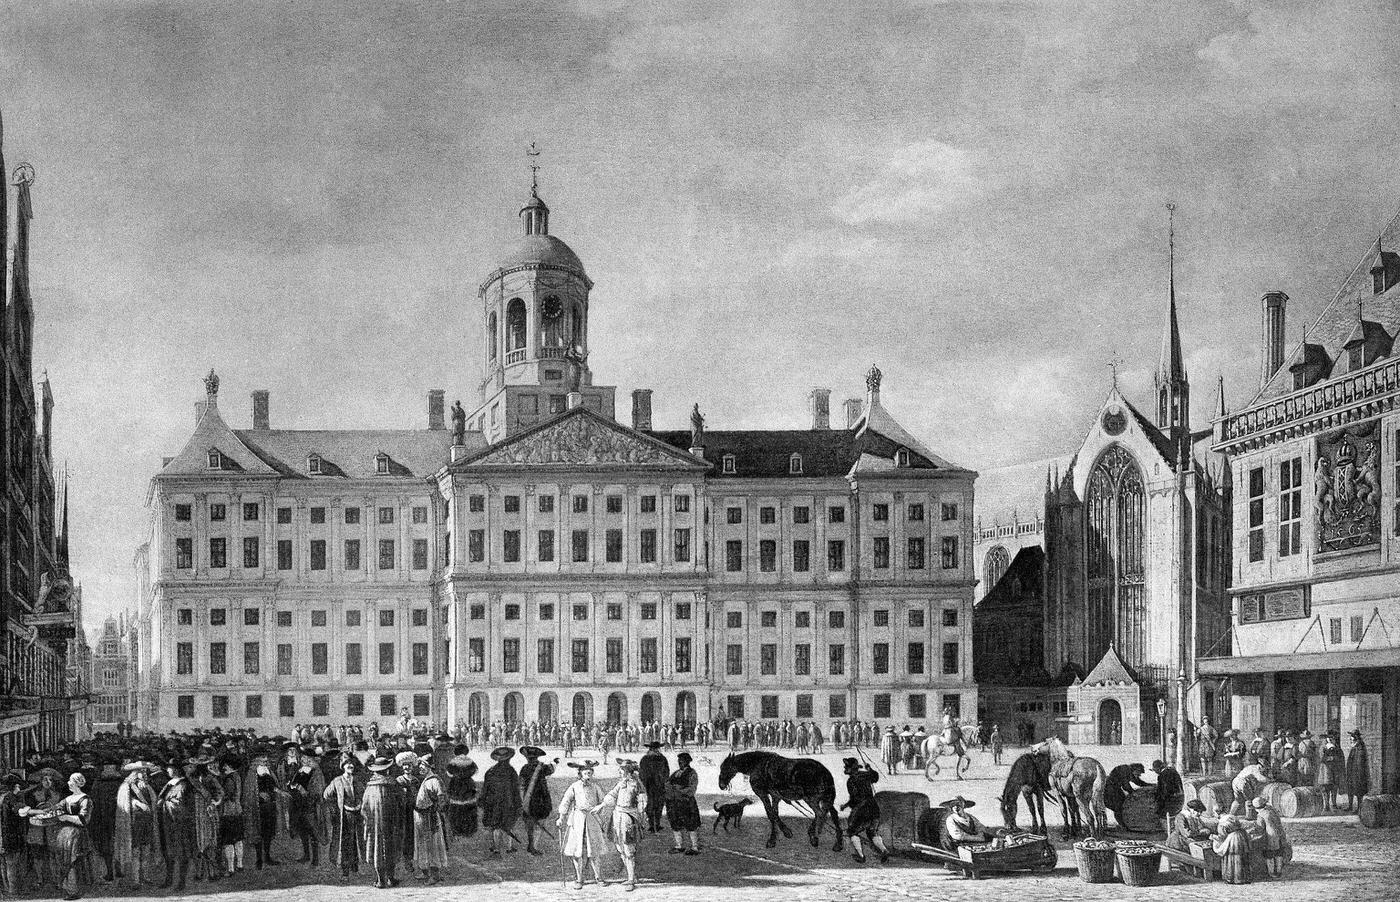 Rijksmuseum (Reichsmuseum) with a repro painting from 1673, Amsterdam, Netherlands, 1900